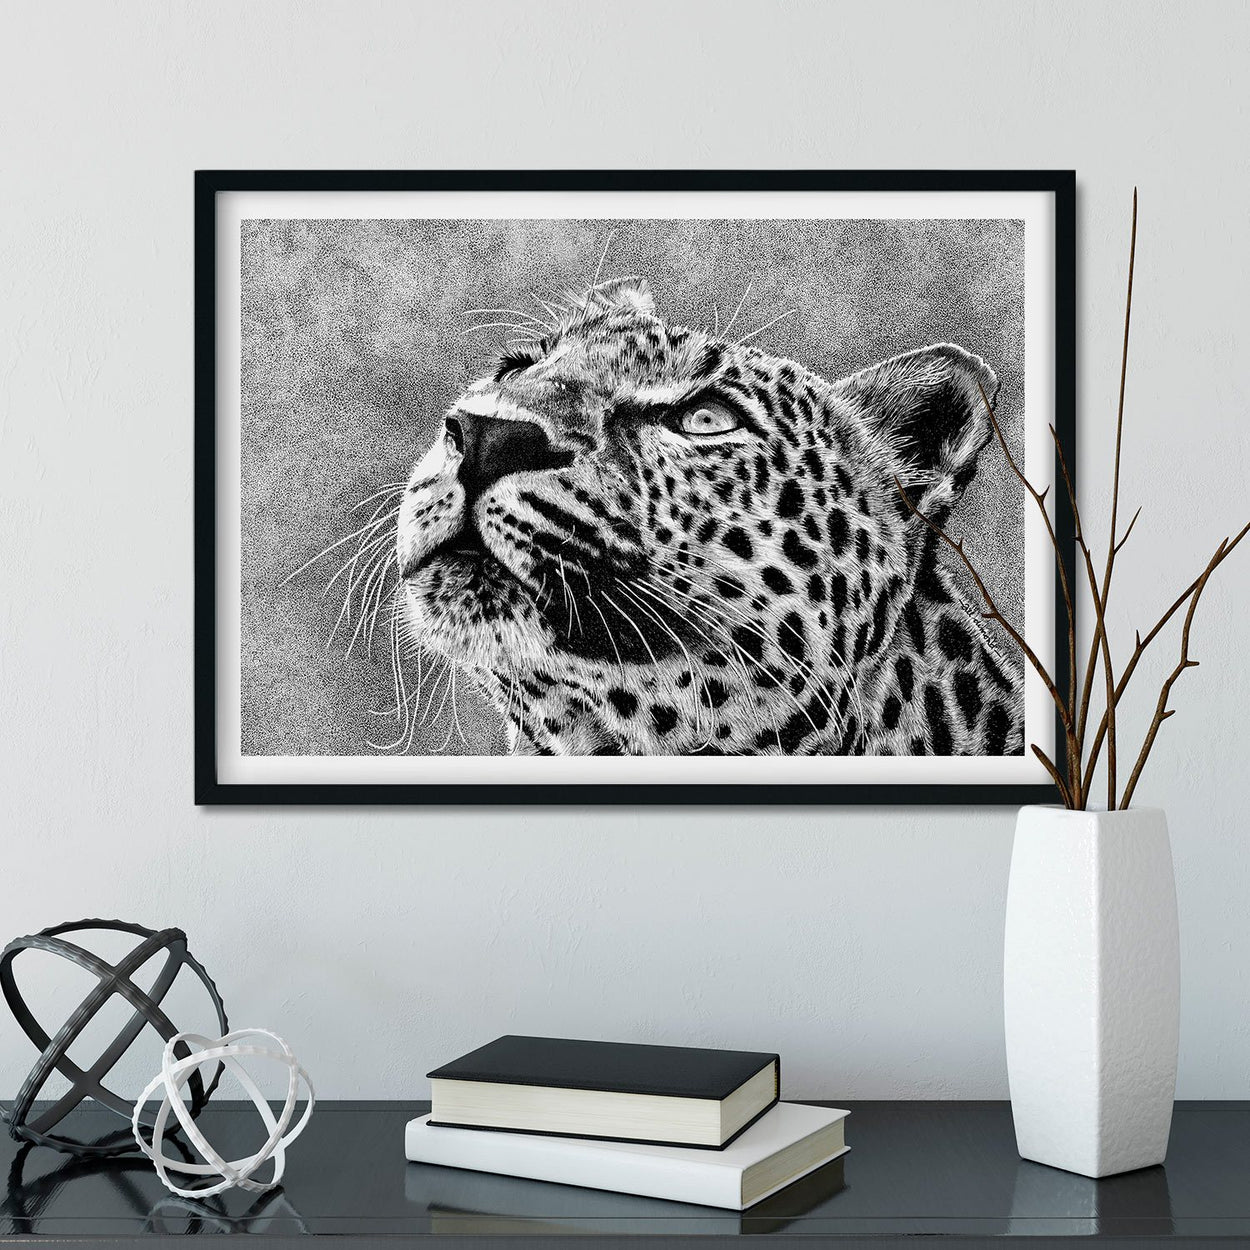 Leopard Wall Art Frame - The Thriving Wild